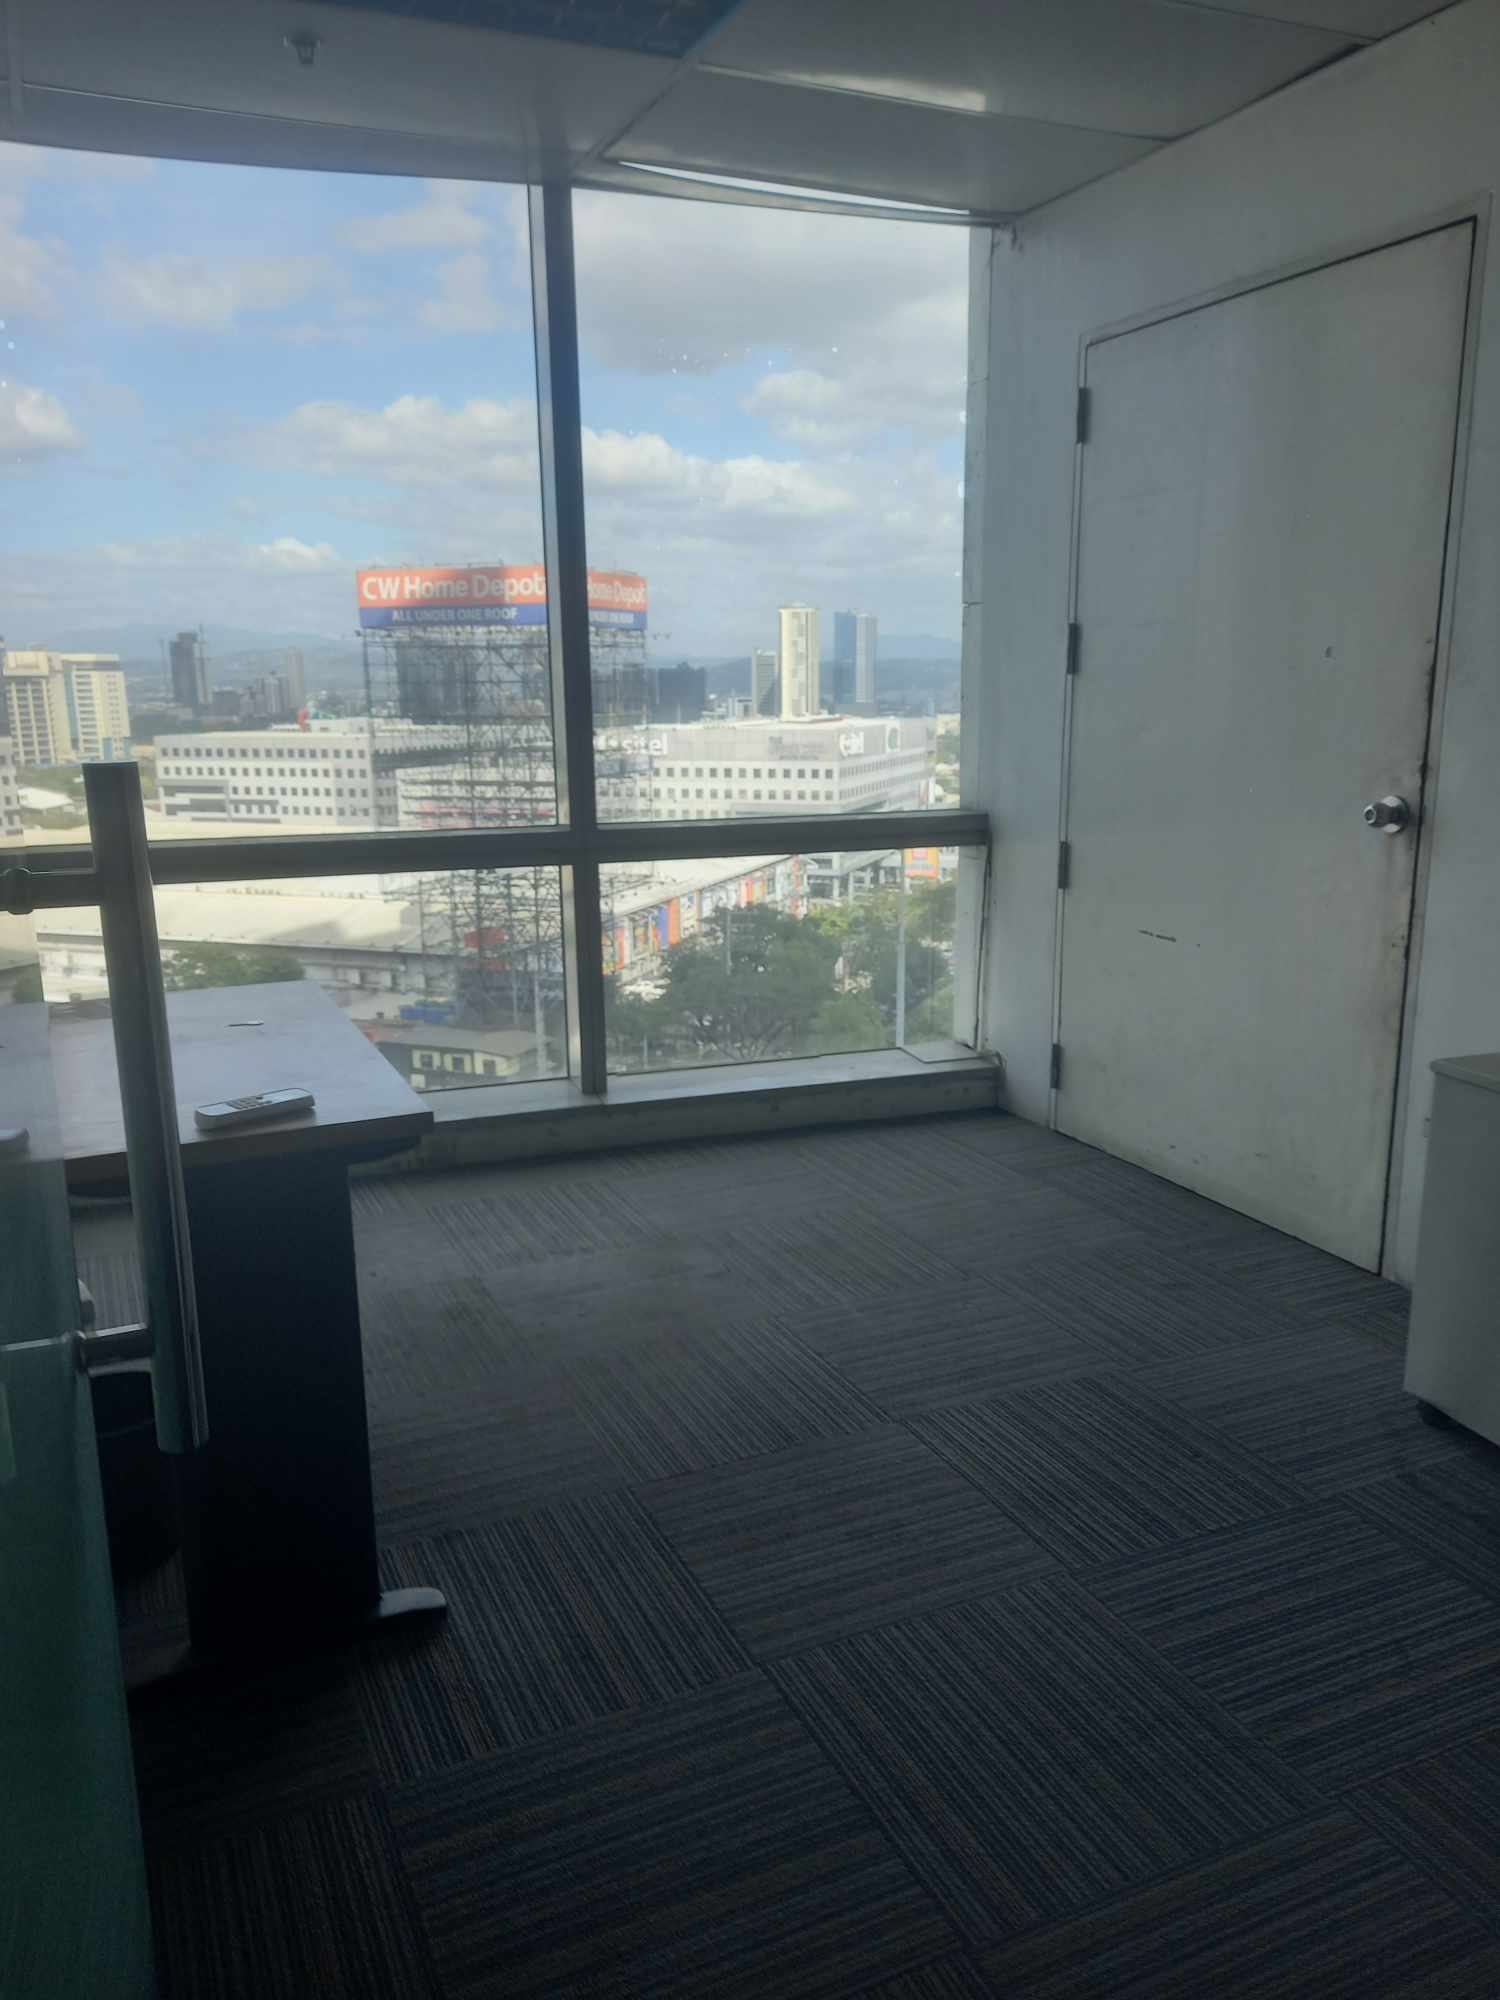 For Rent Lease Semi Furnished Office Space Ortigas Center 156sqm